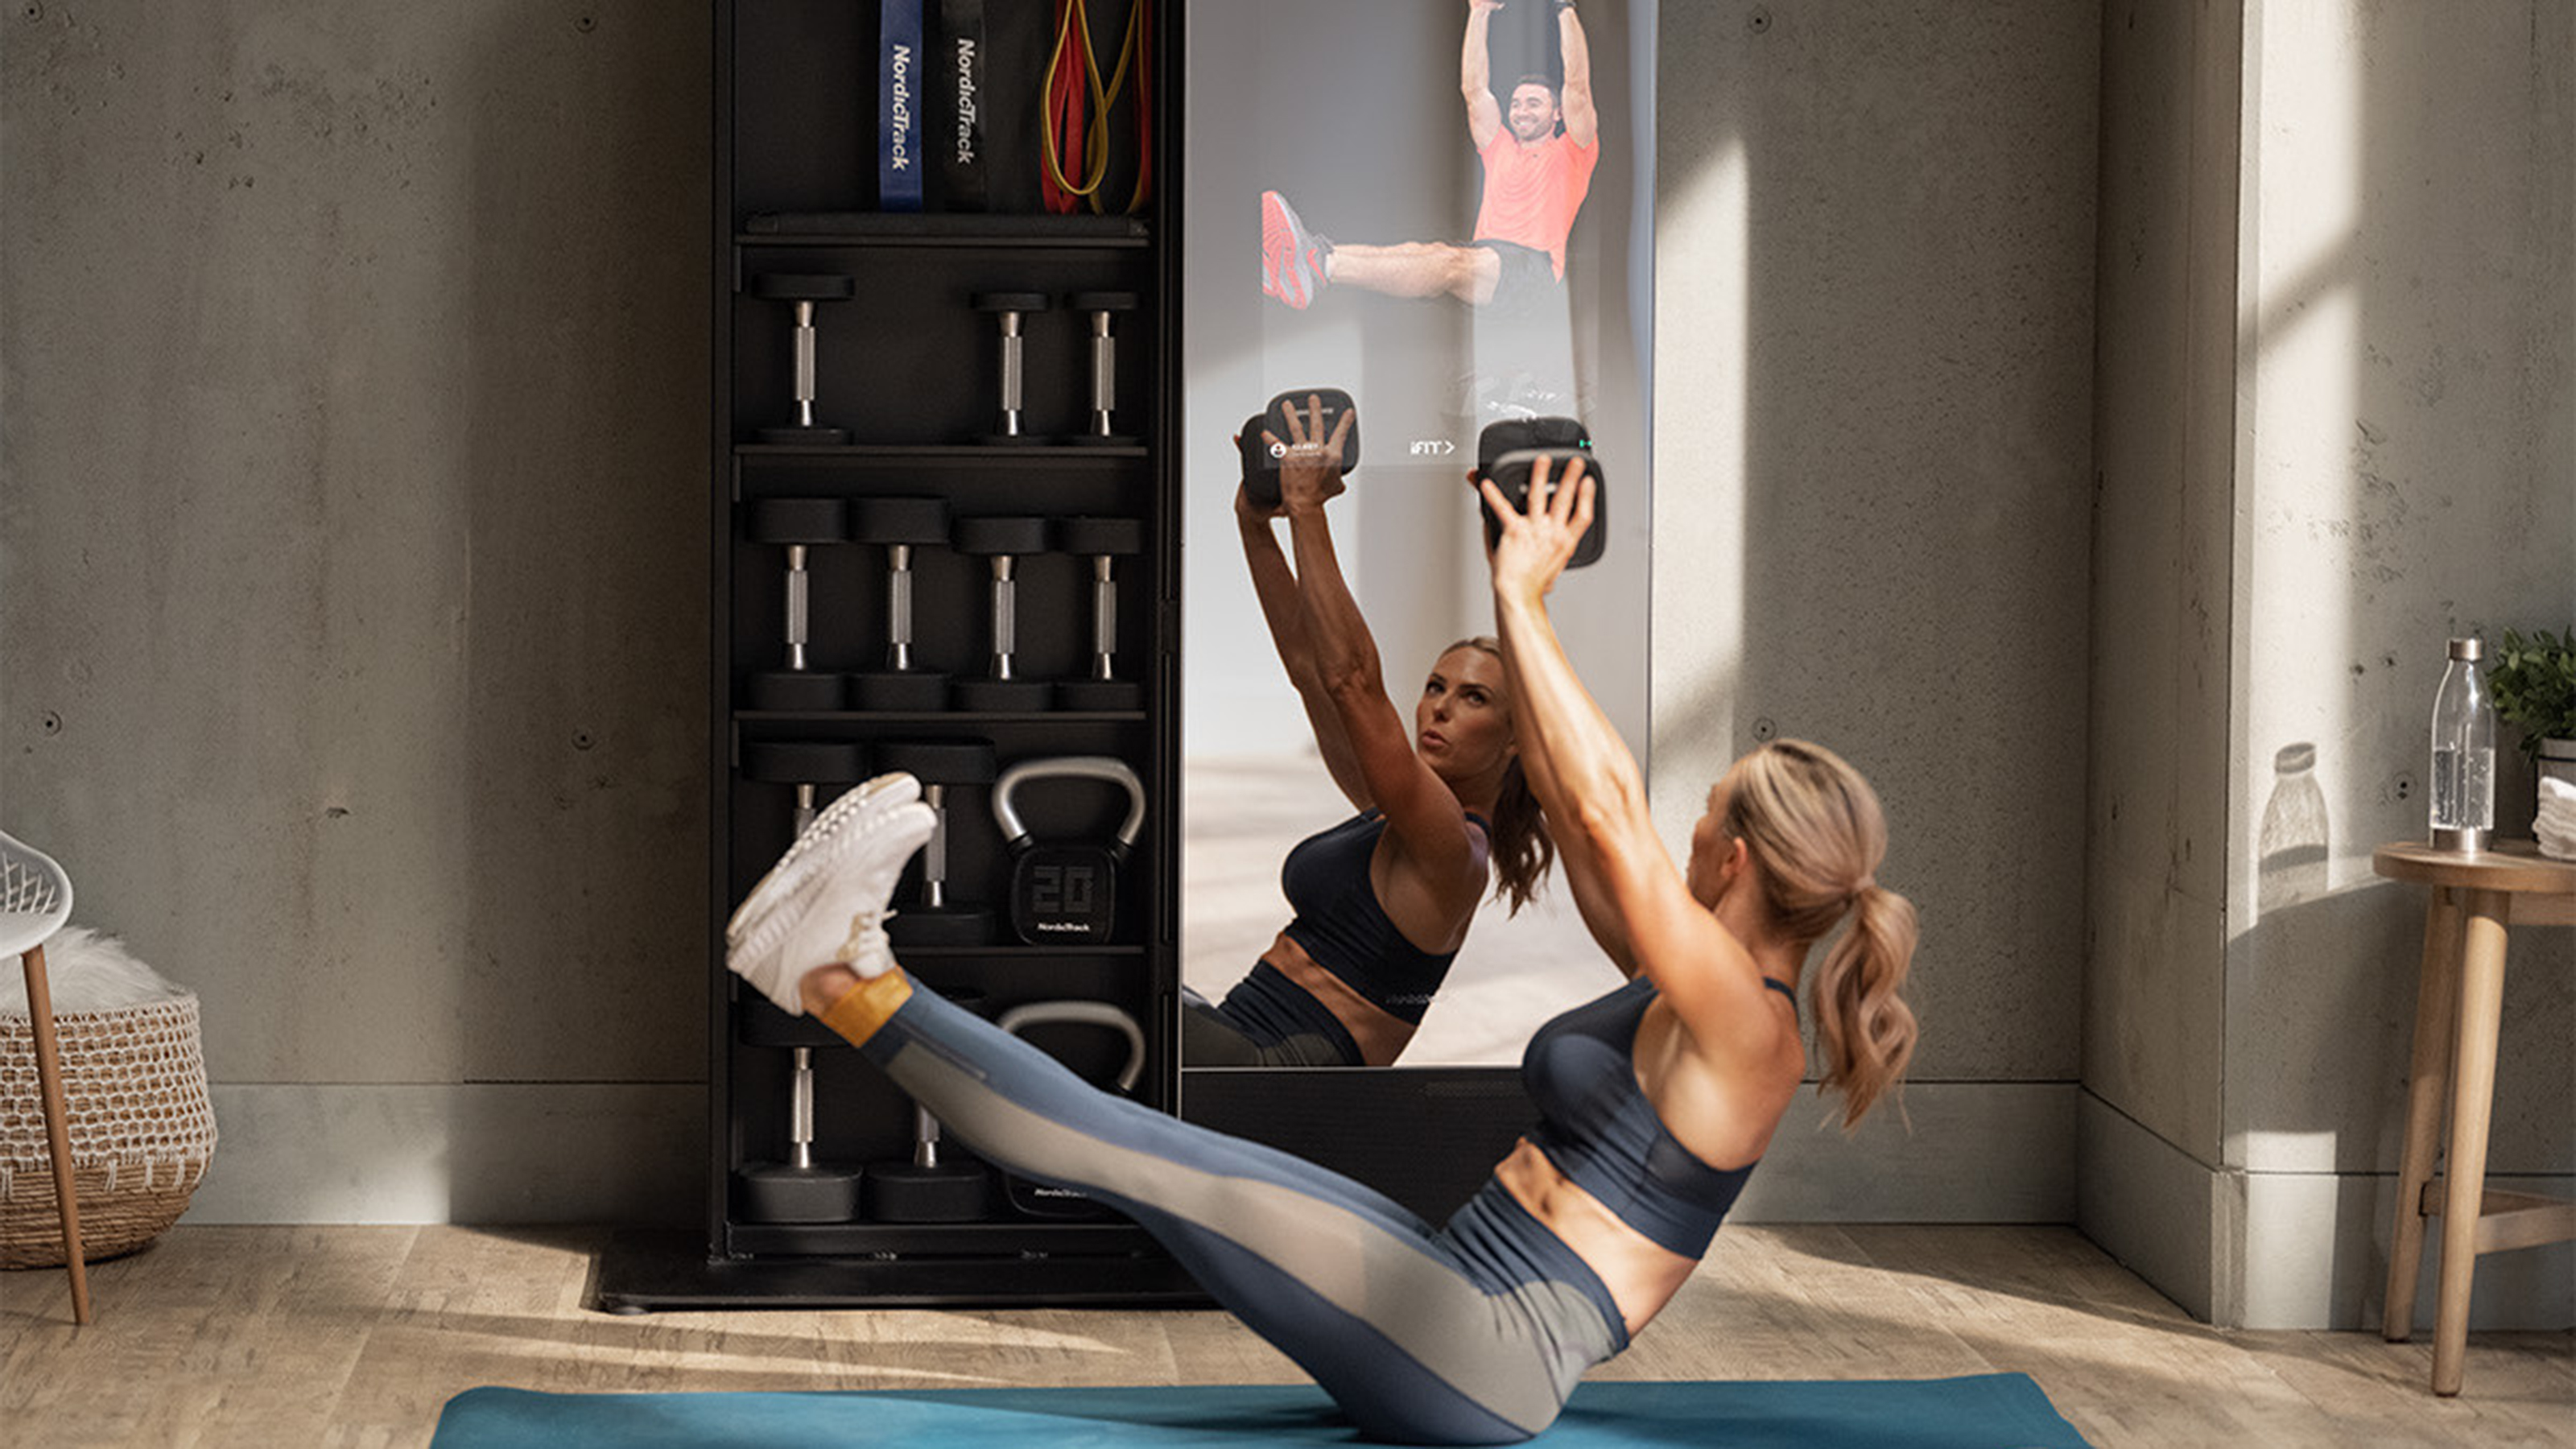 How to hang garage gym mirrors 